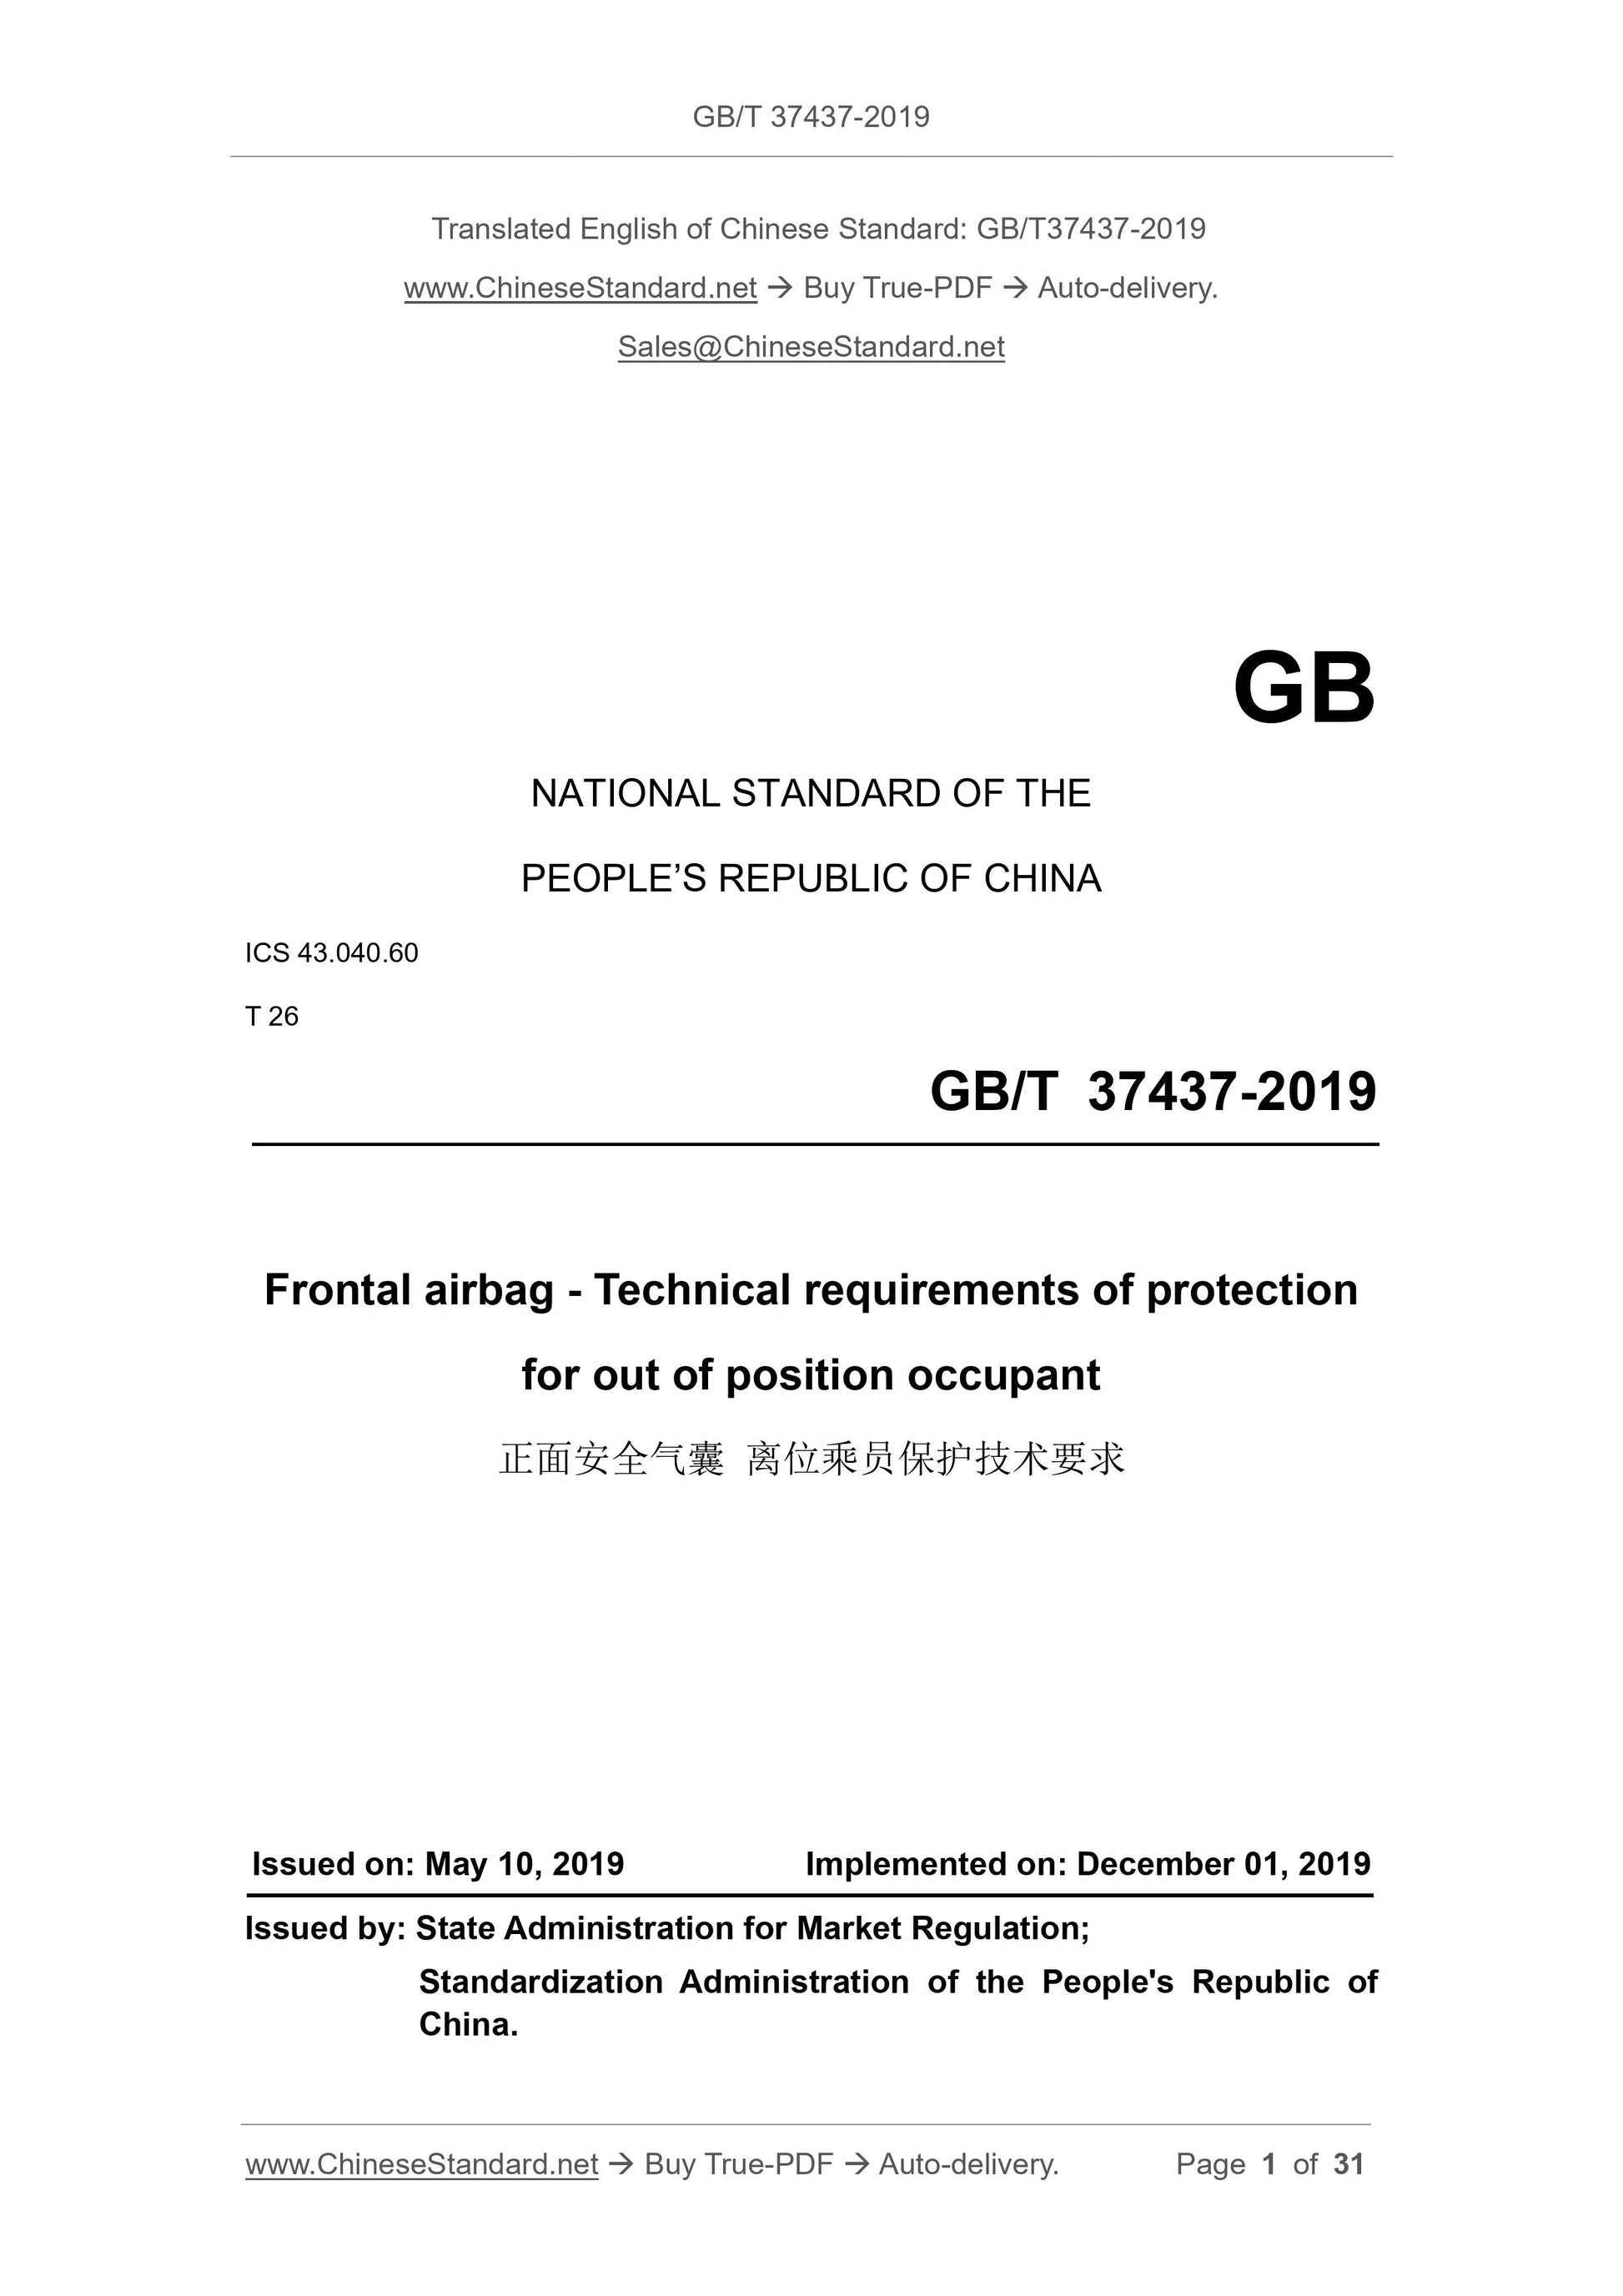 GB/T 37437-2019 Page 1